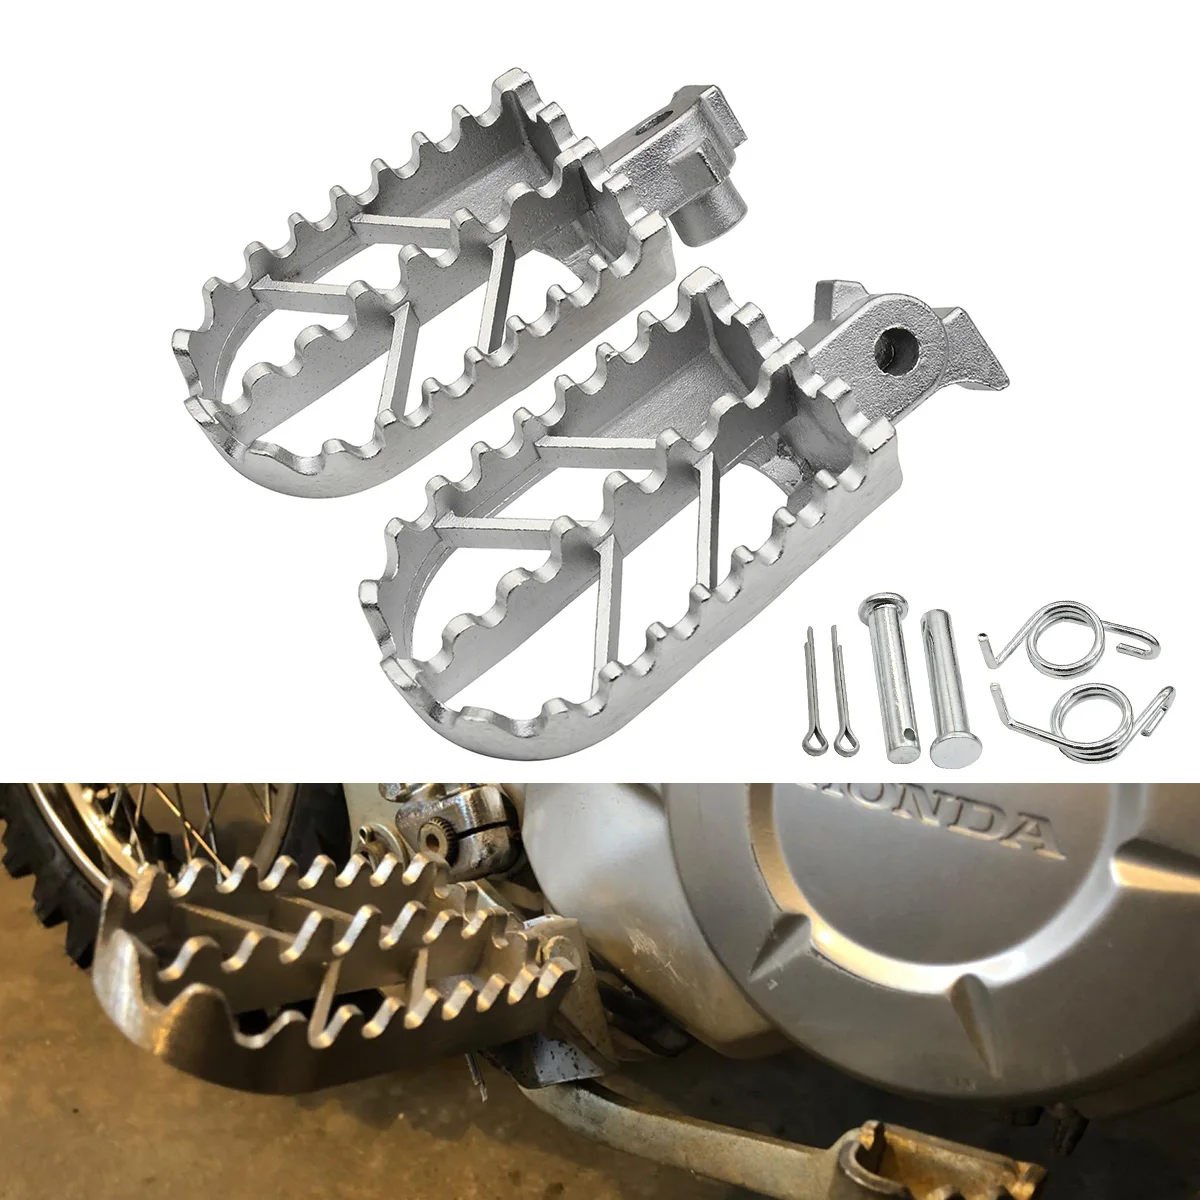 

Motocross Stainless Steel Foot Pegs Rests Pedals Footpegs For Honda XR50R XR70R XR80R XR100R CRF50 CRF50F CRF70 CRF70F CRF80